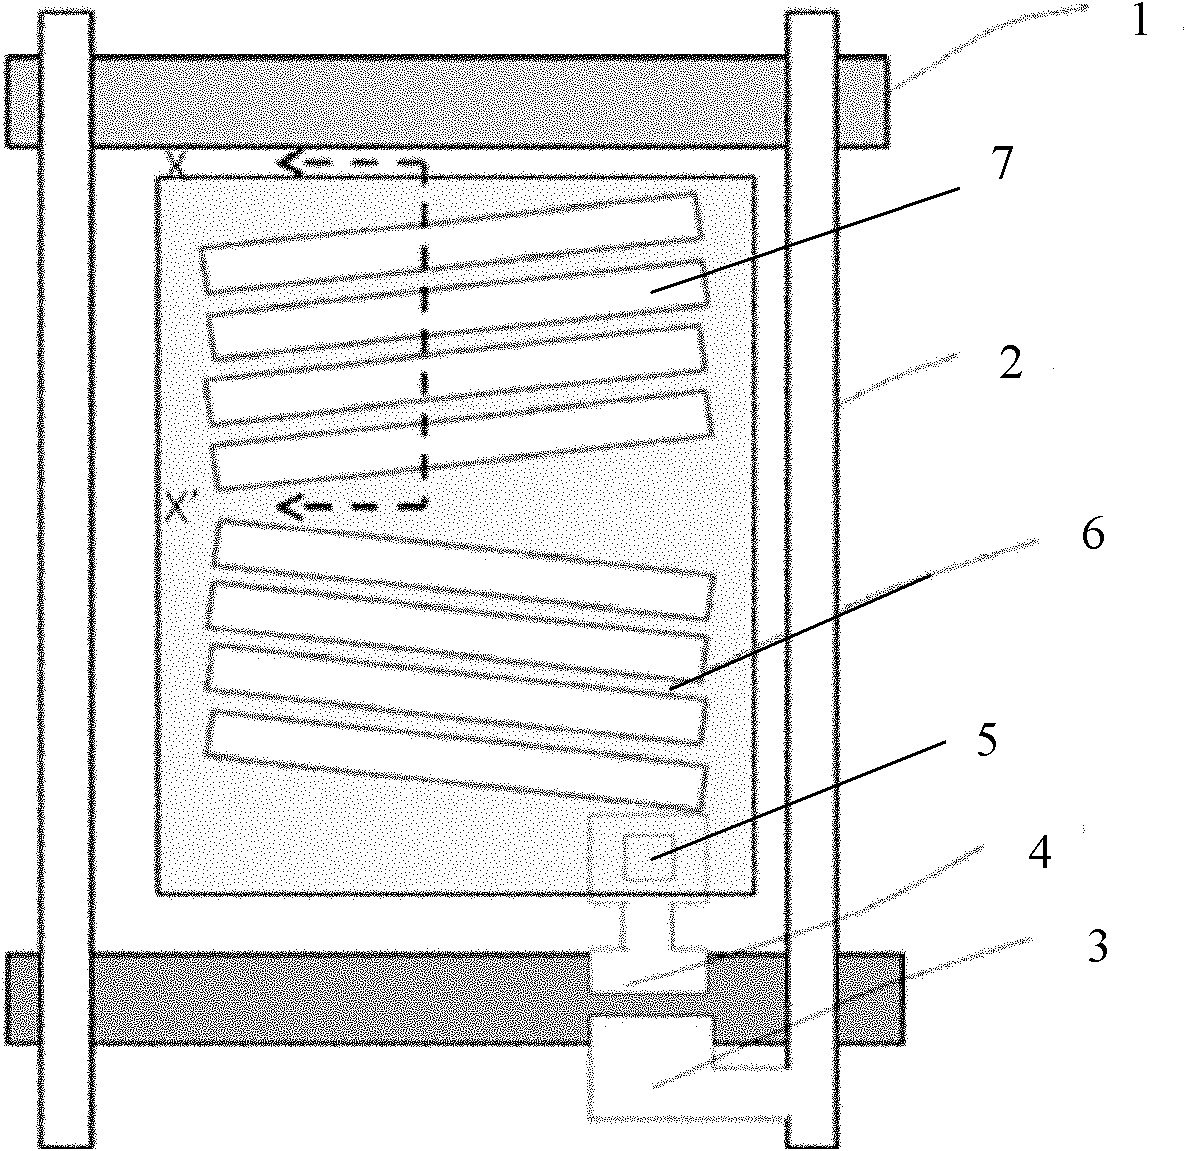 Array substrate of TFT-LCD (Thin Film Transistor-Liquid Crystal Display) and manufacturing method thereof